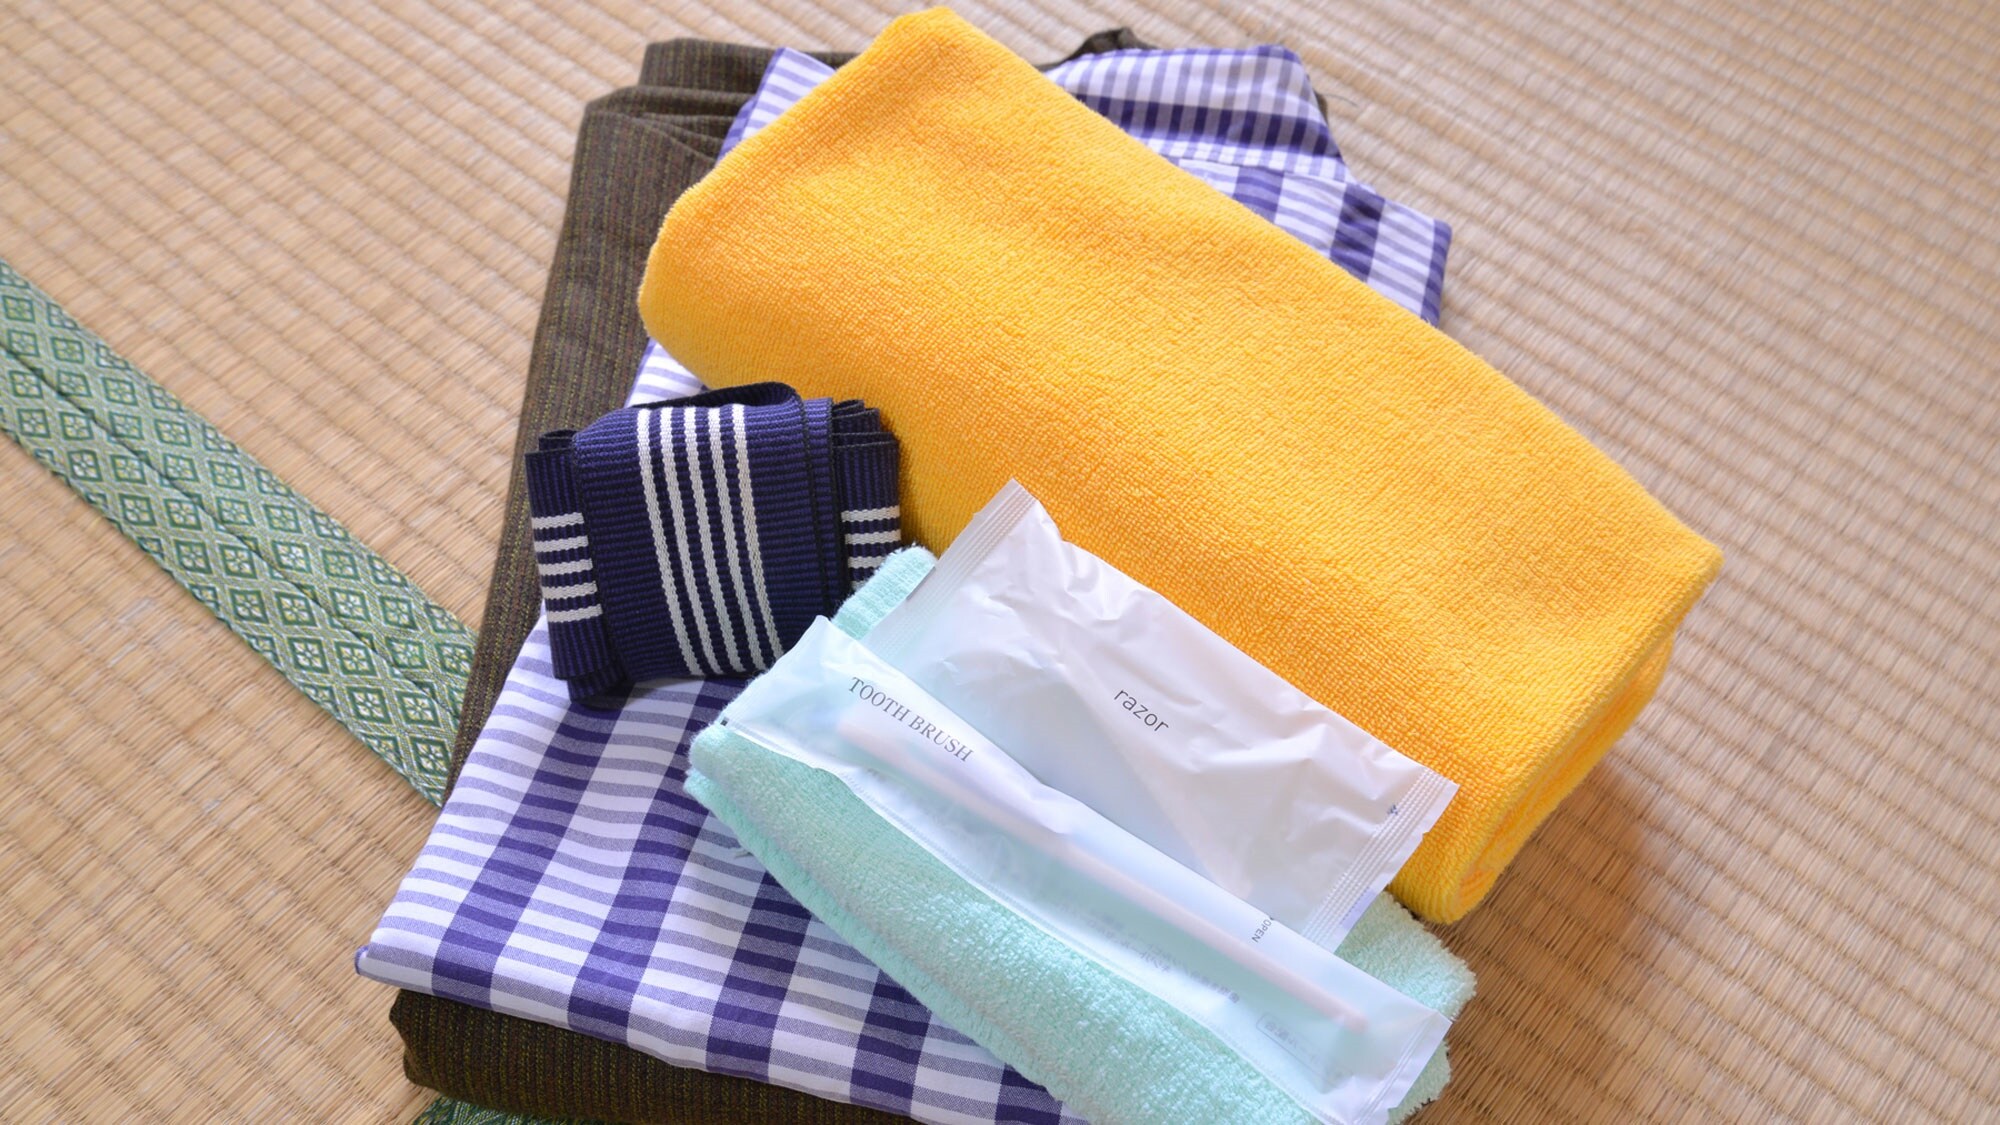 * Room amenities / towels, yukata, toothbrush, etc. are available.